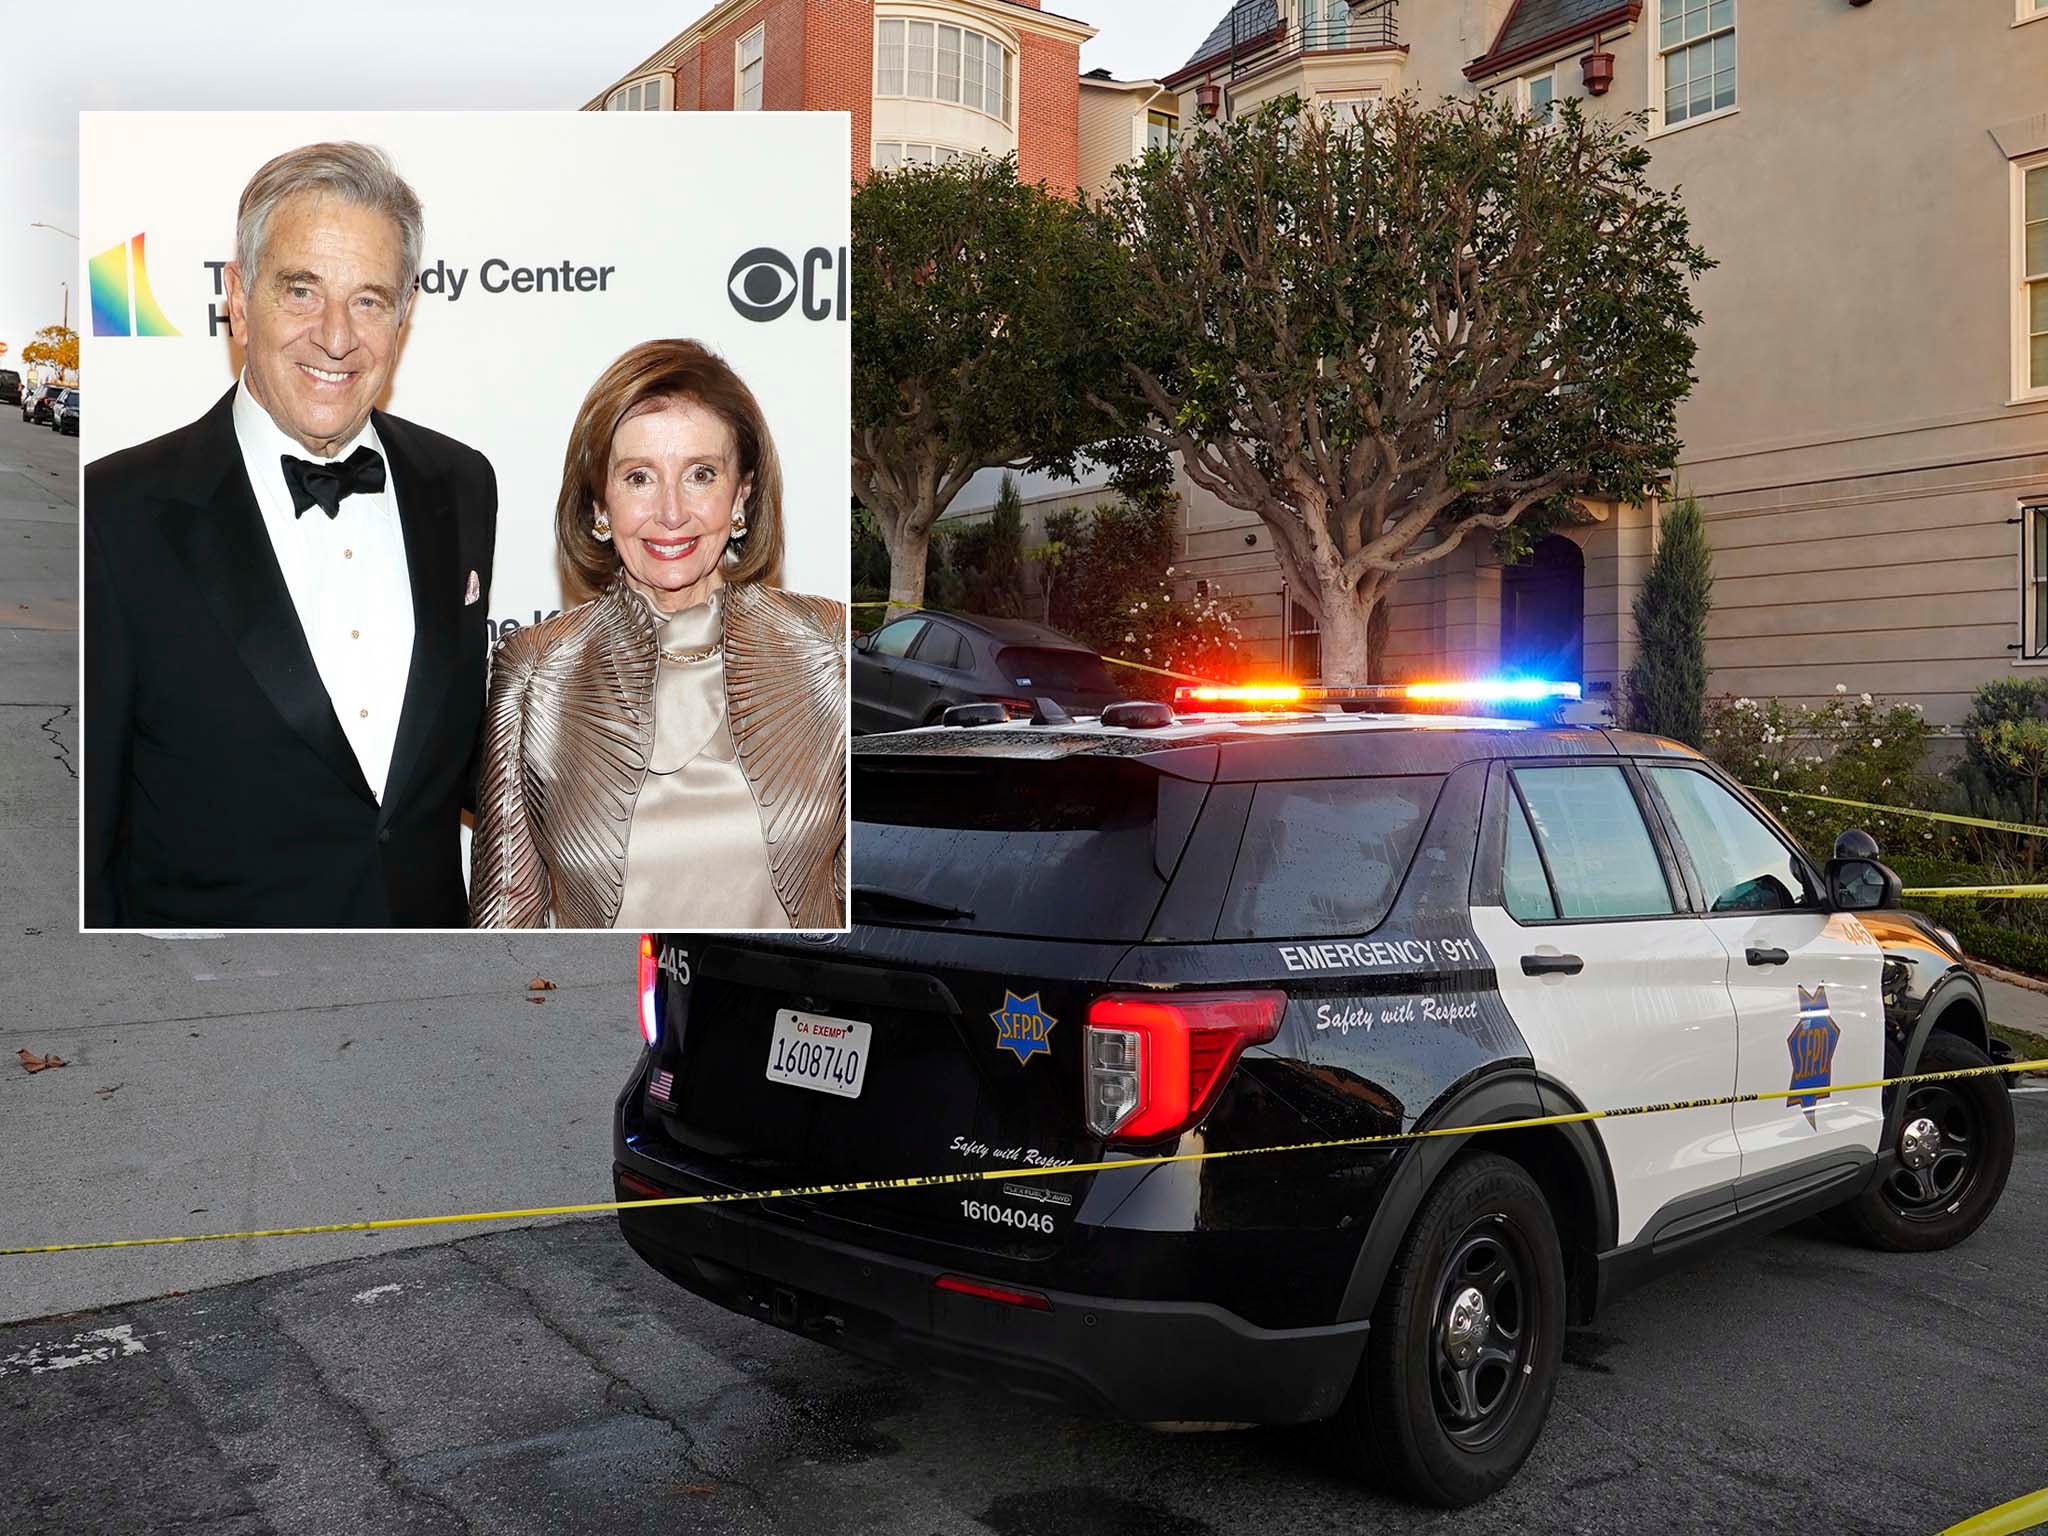 Paul Pelosi attack latest: Nancy Pelosi's husband recovering from skull  fracture surgery as David Depape is charged with attempted homicide | The  Independent